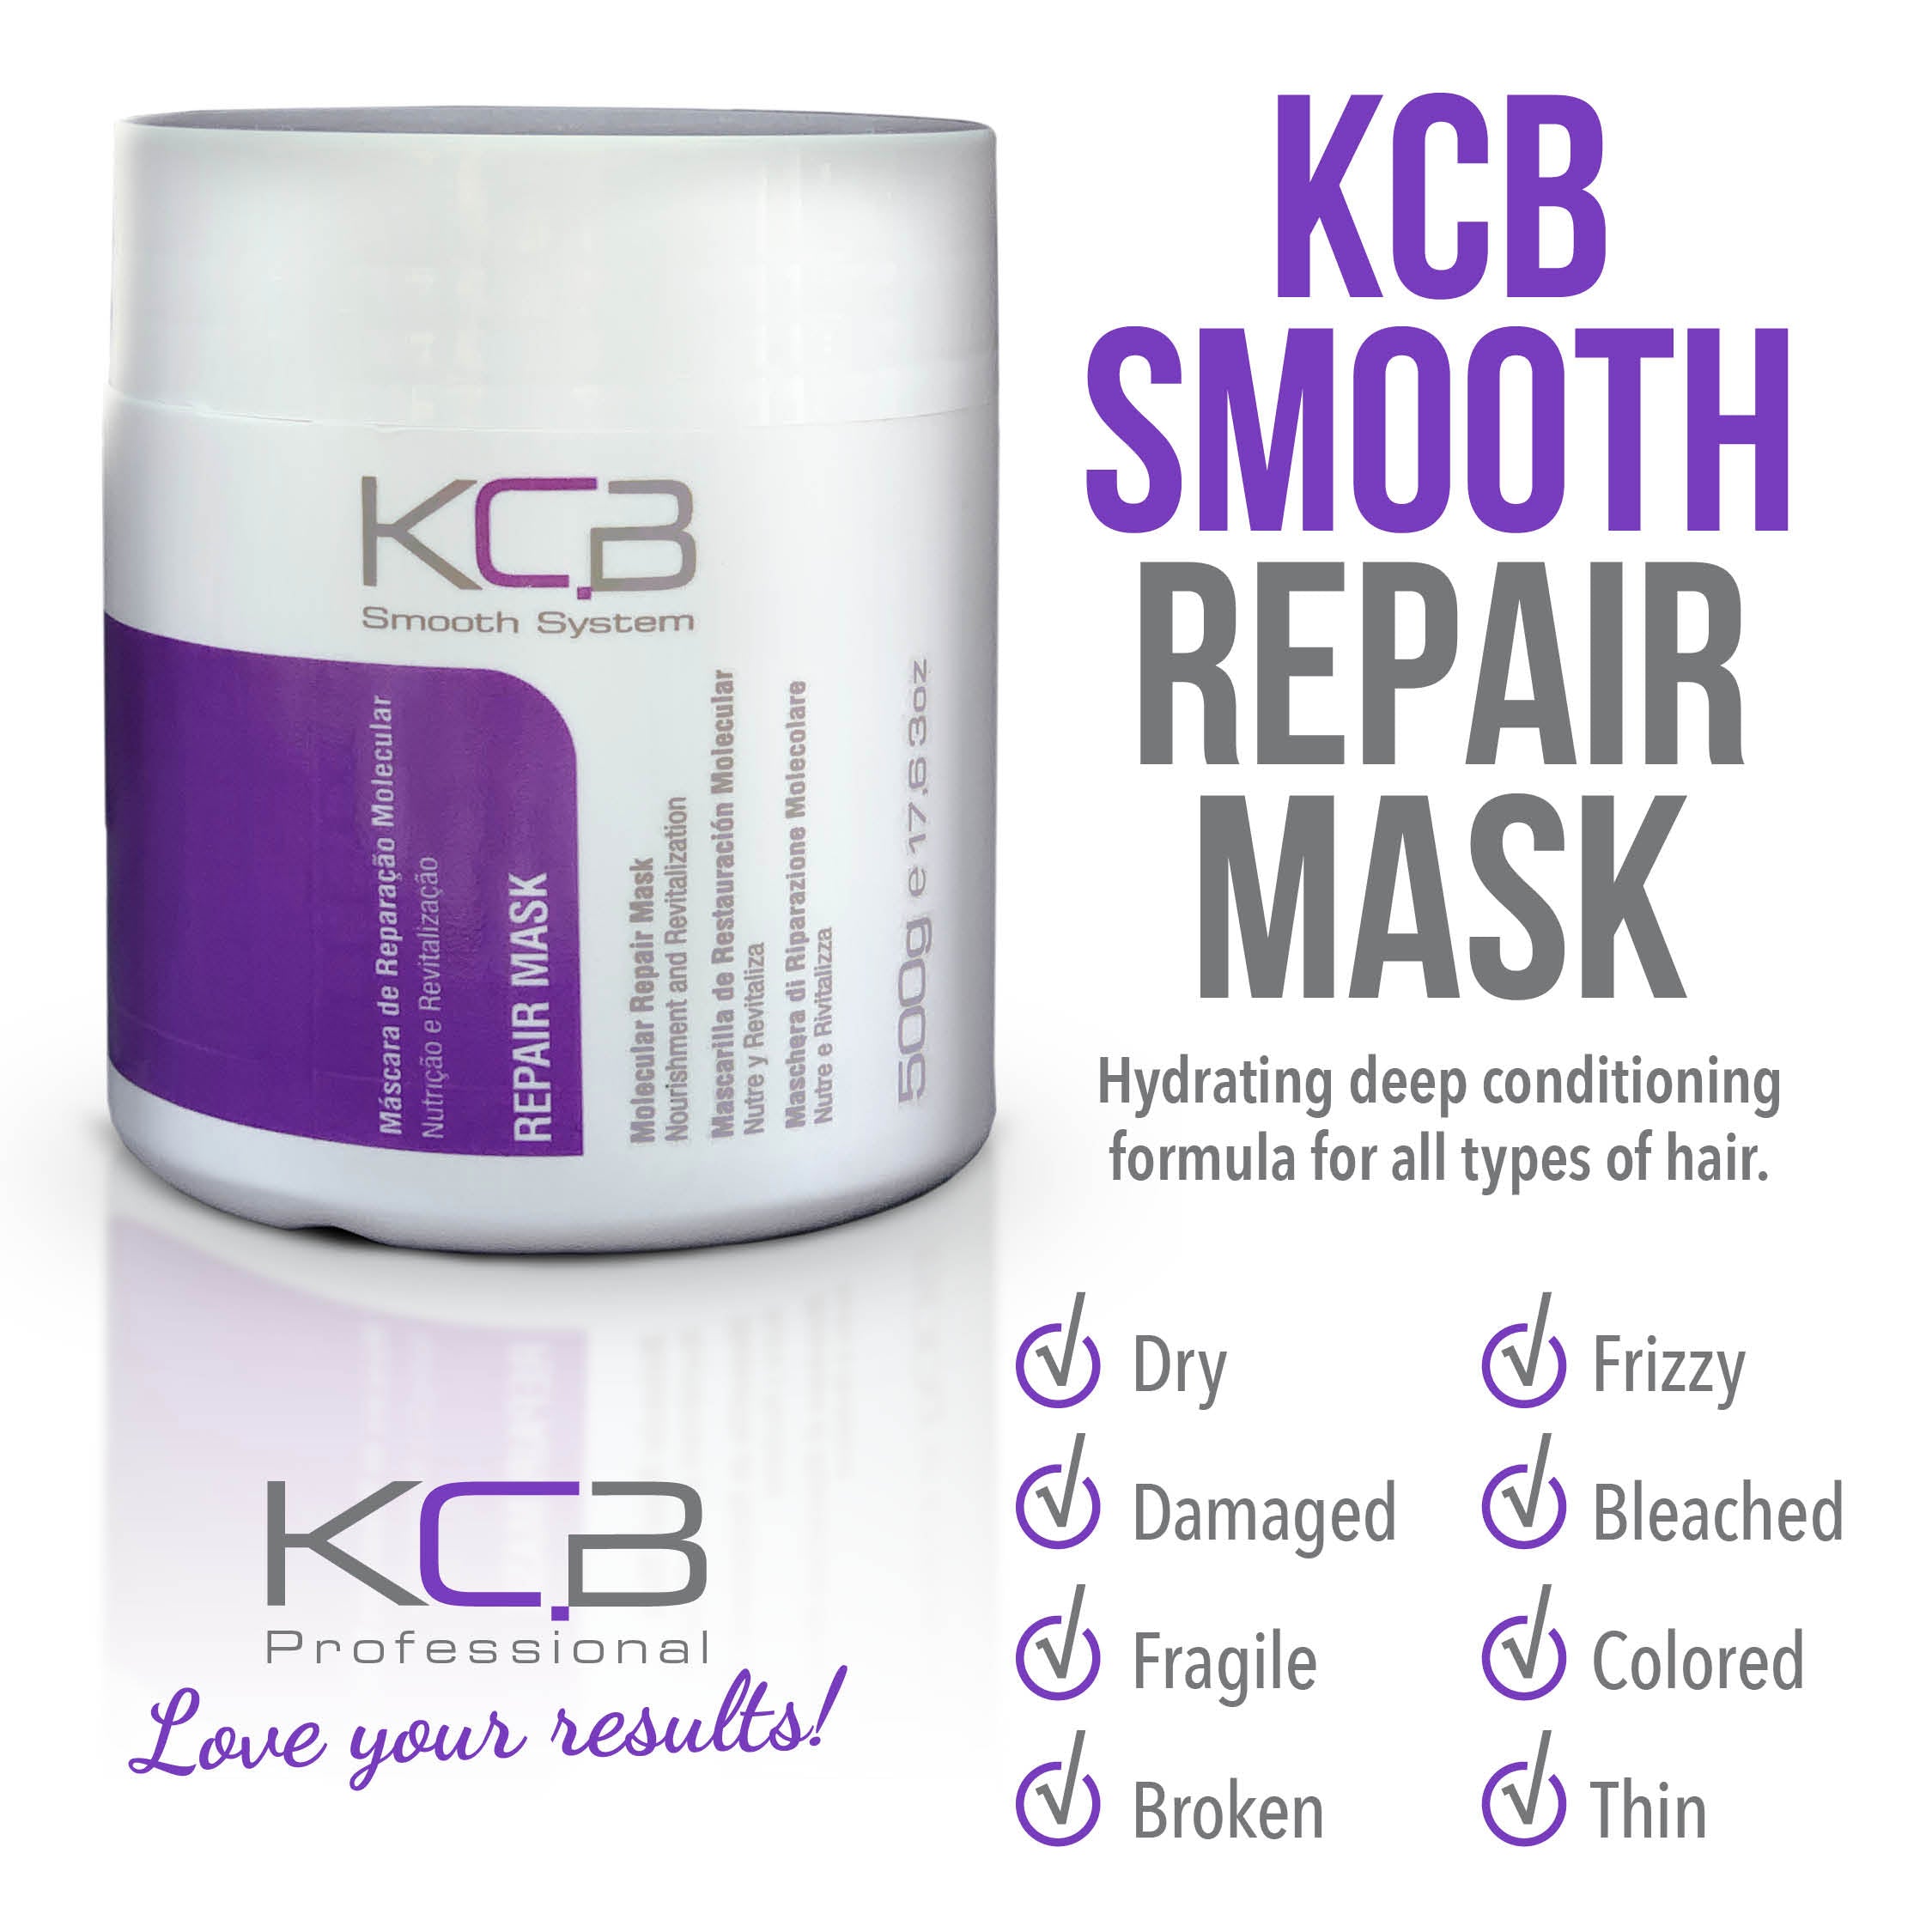 KCB Professional Smooth Repair Hair Mask for Smoothing, Deep Conditioning, Bonding Hair Treatment, Frizz Control, All Hair Types, 17.63 oz / 500g. Enriched with Jojoba Oil, Coconut and Cocoa Butter.